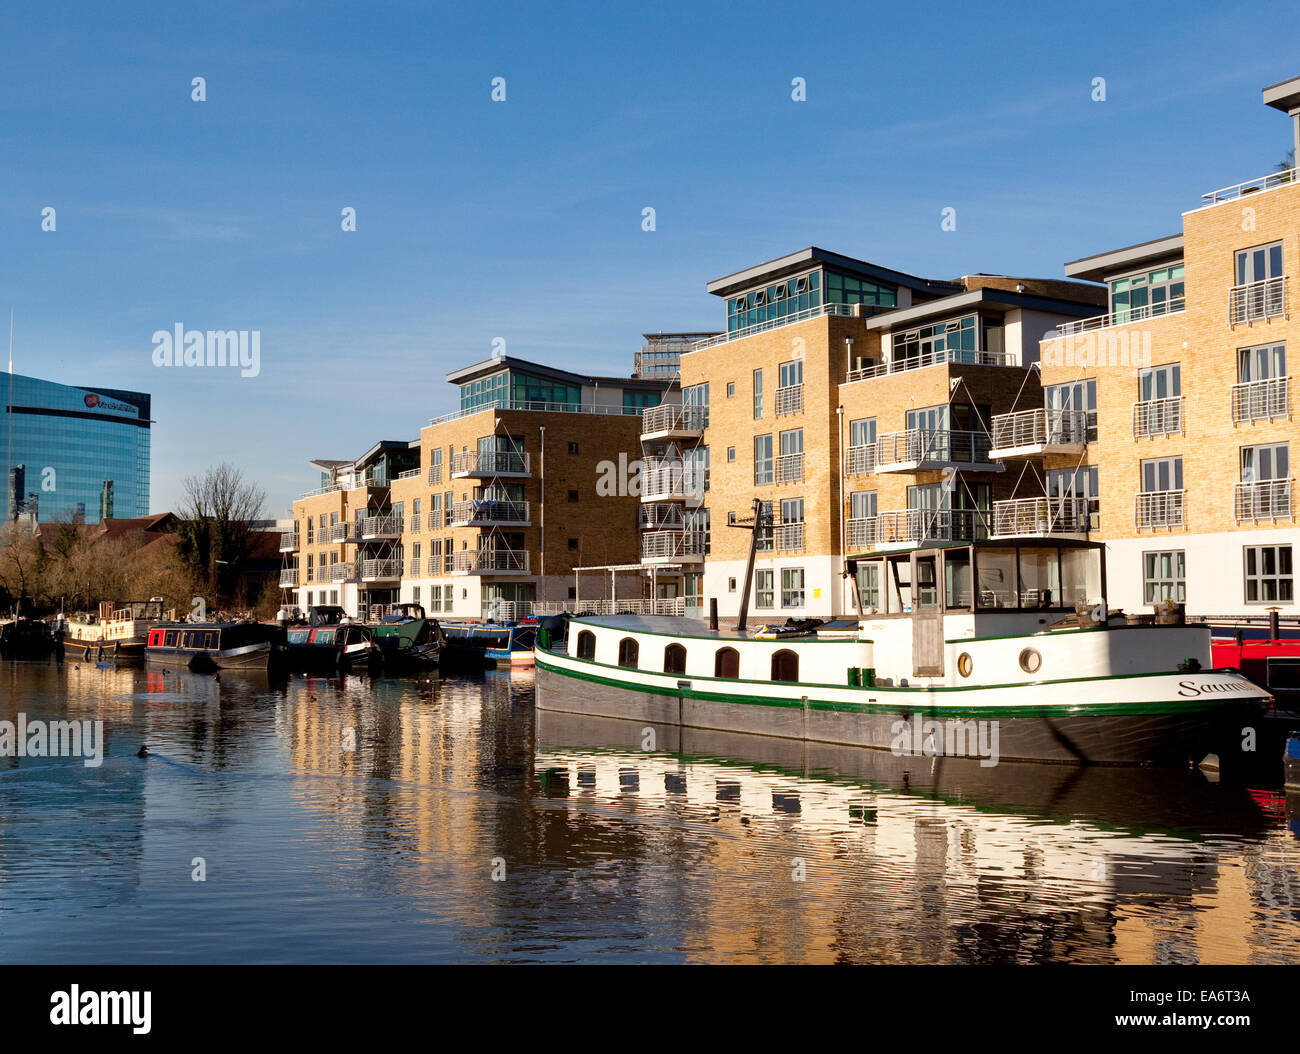 Apartments and canalboats on the Grand Union Canal at Brentford, London, UK Stock Photo